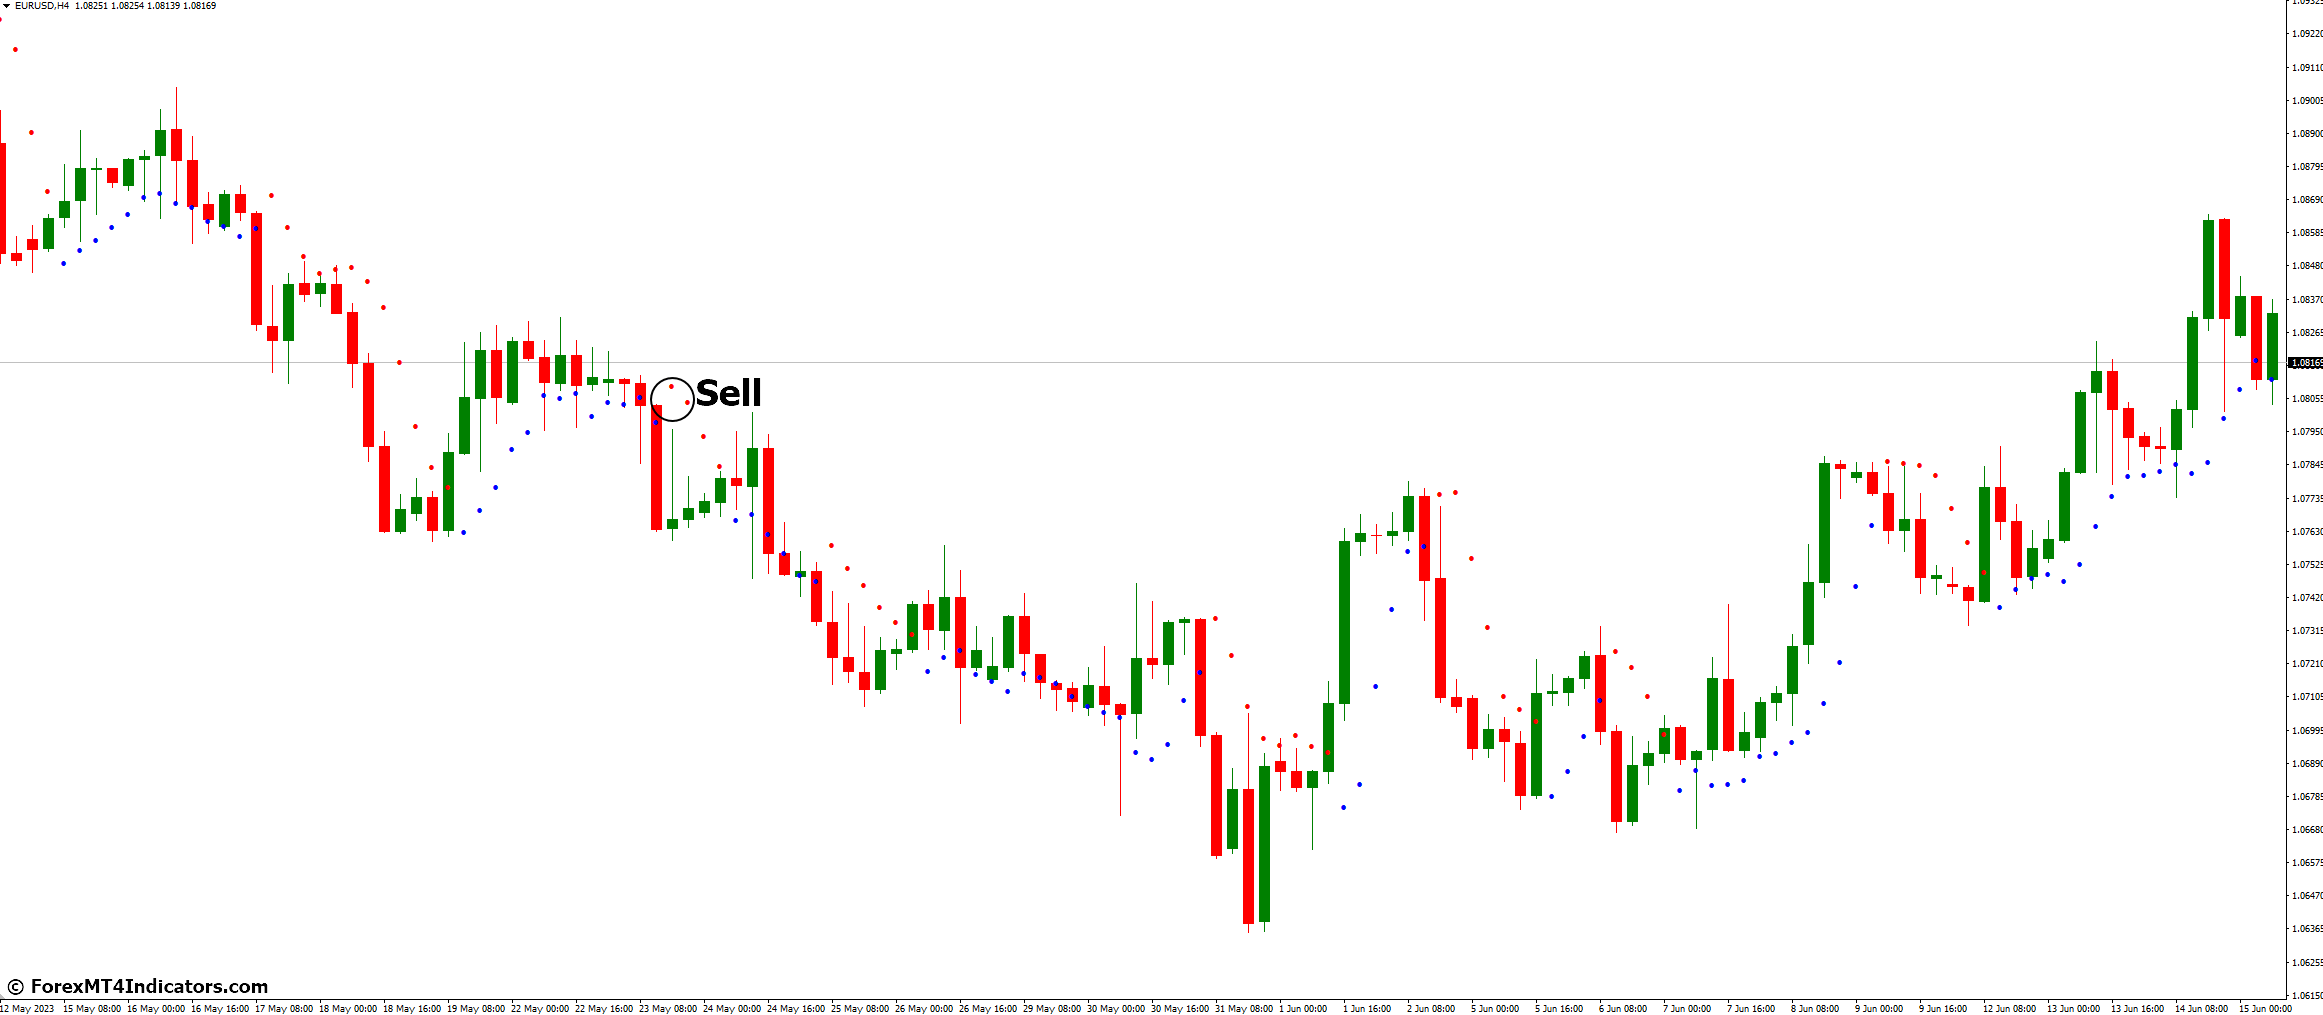 How to Trade with HiLo Activator Indicator - Sell Entry